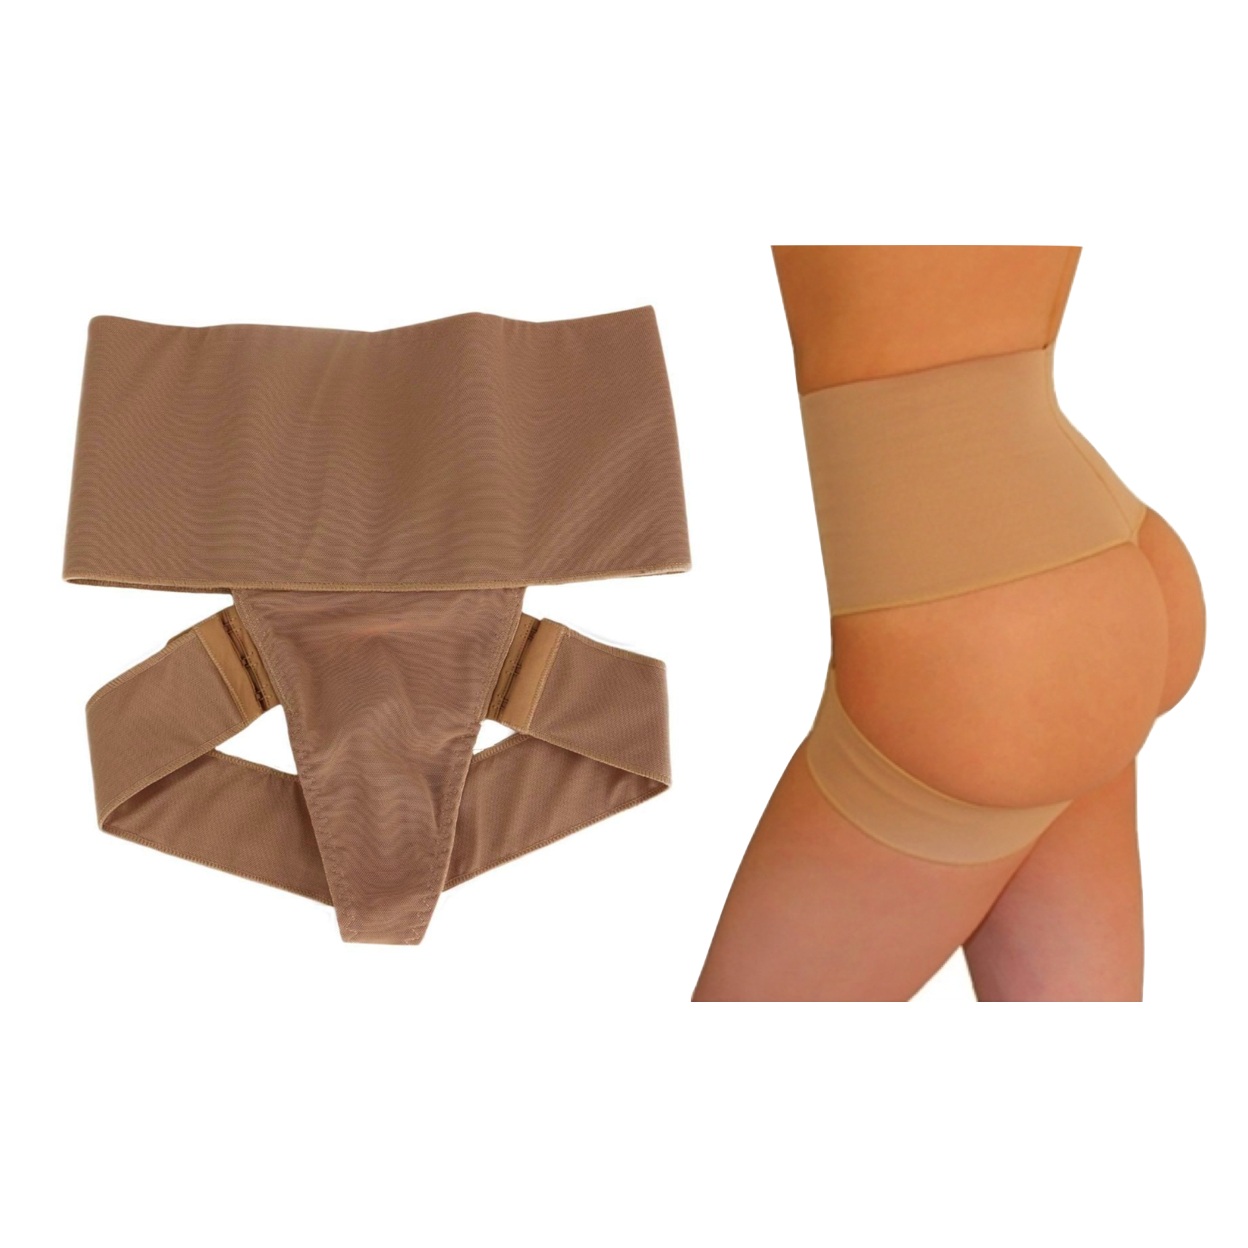 Adjustable Butt Booster Control Shaper In Regular And Plus Sizes - Beige, S